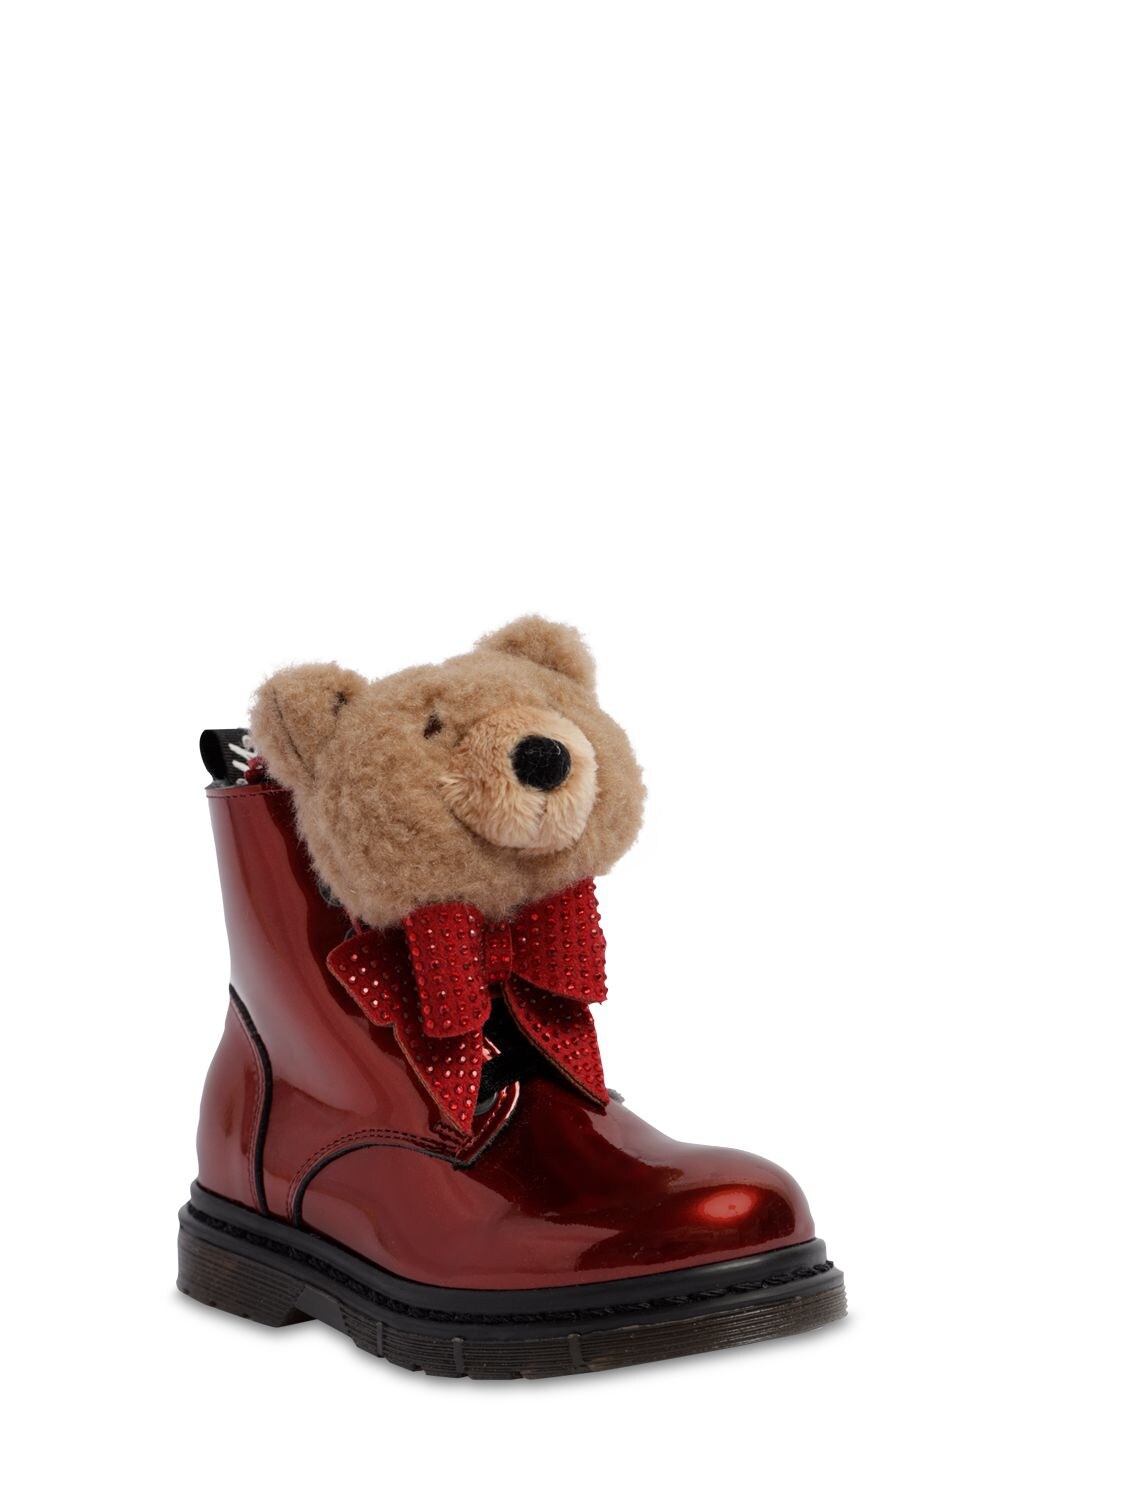 Monnalisa Kids' Patent Leather Boots W/ Teddy In Red